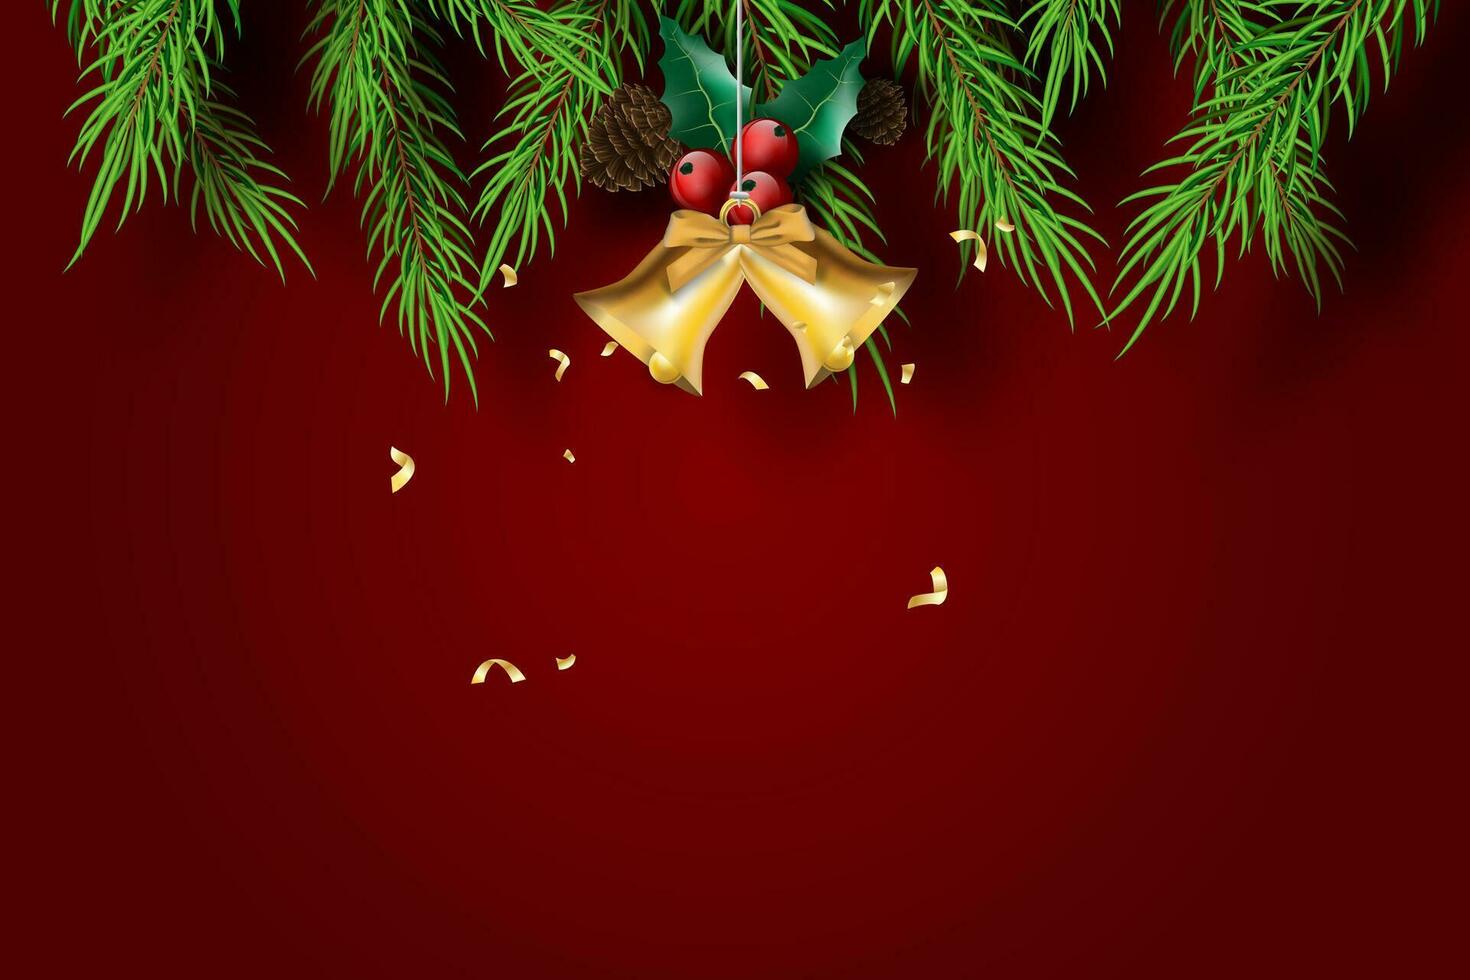 Paper art of Merry Christmas and Happy New Year with red tone background.Creative minimal pine tree and Golden bell for greeting card.Holiday festival party decoration element graphic poster.Vector vector